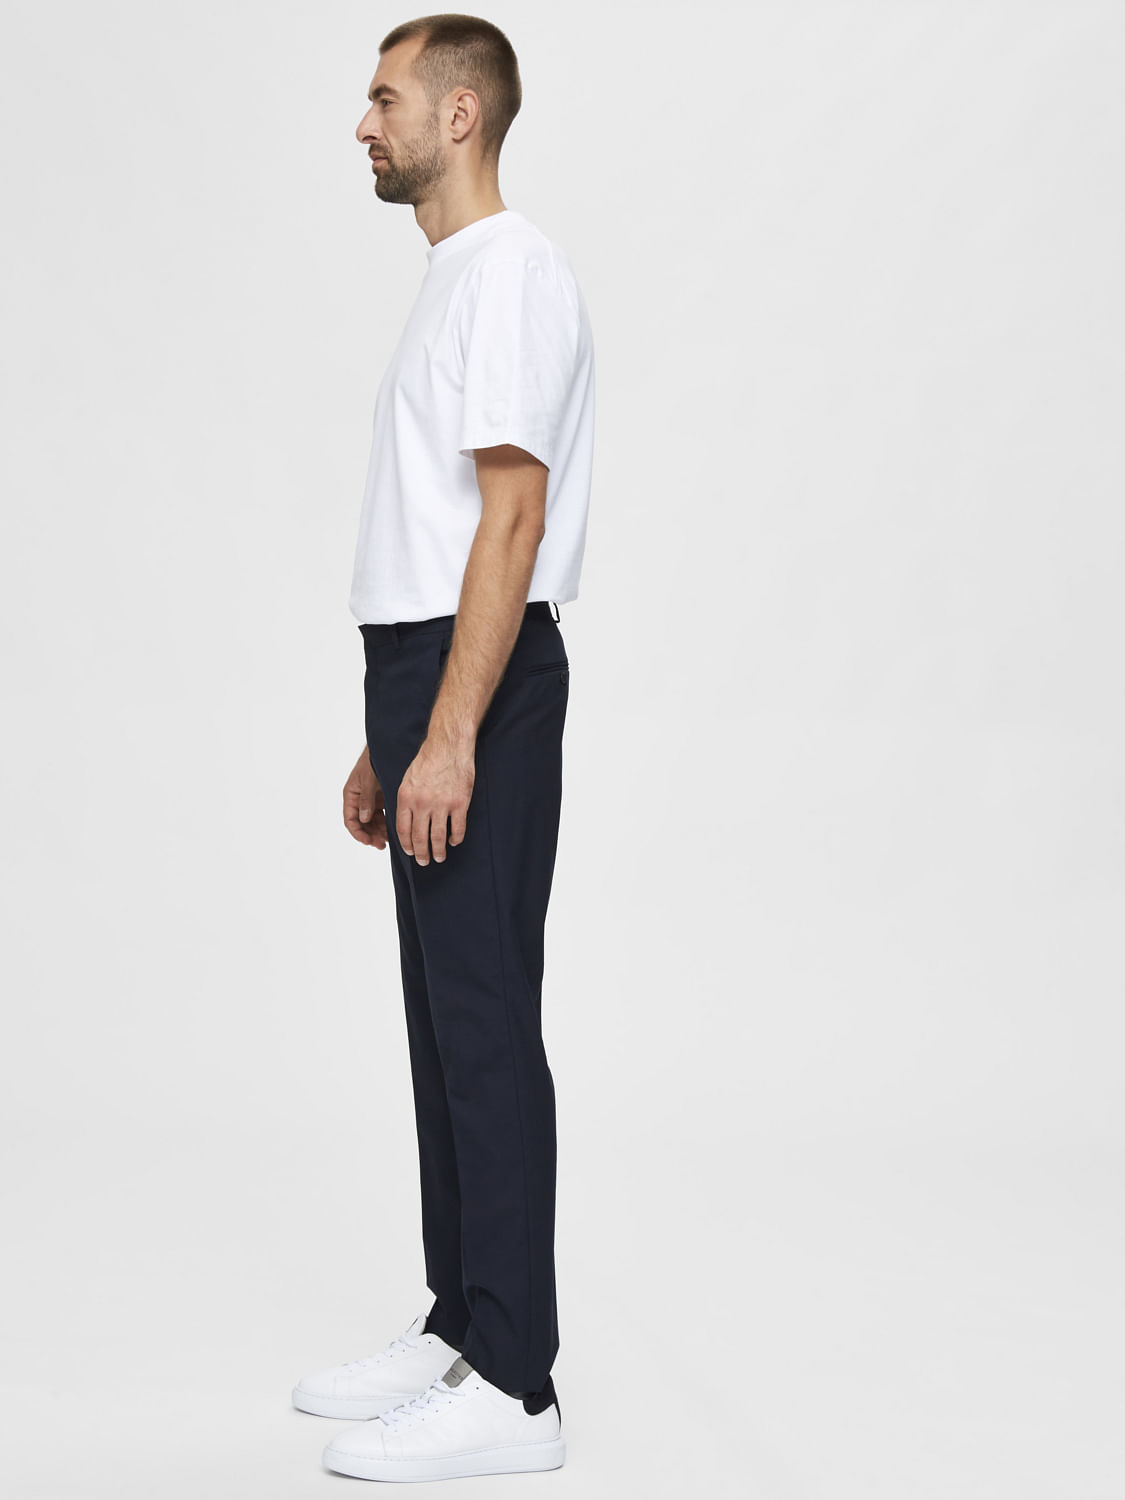 Slim Fit trousers - Navy blue/Checked - Men | H&M IN